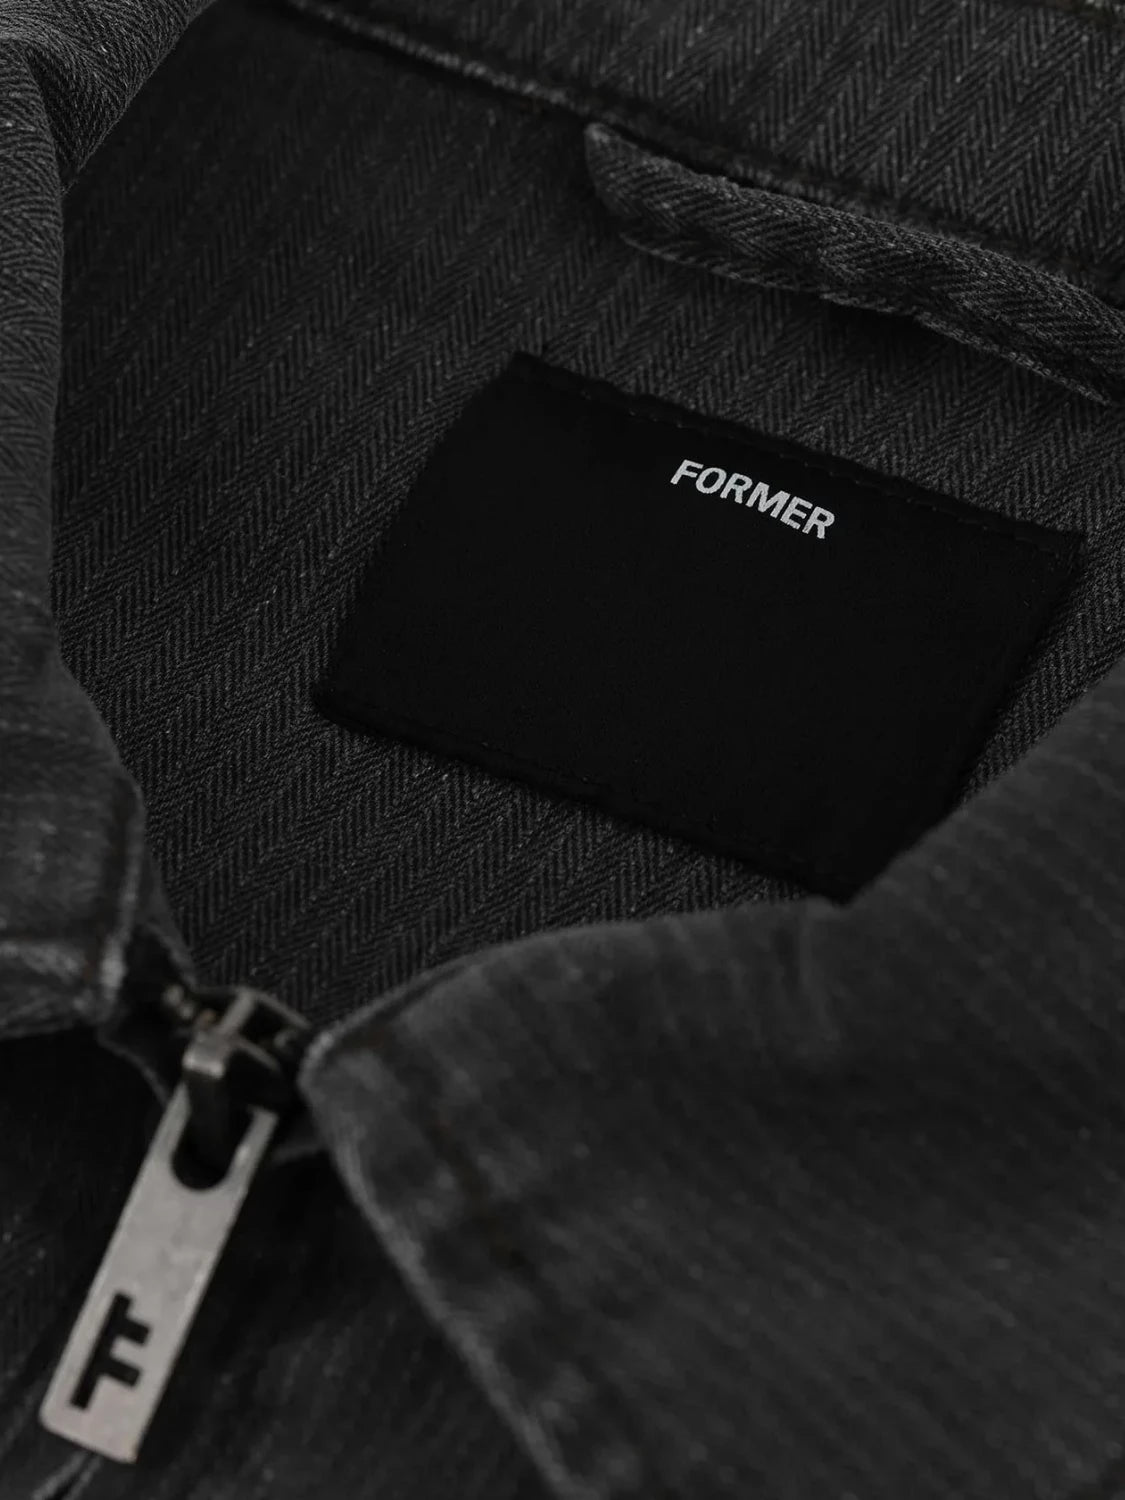 FORMER DISTEND JACKET CHARCOAL PIN